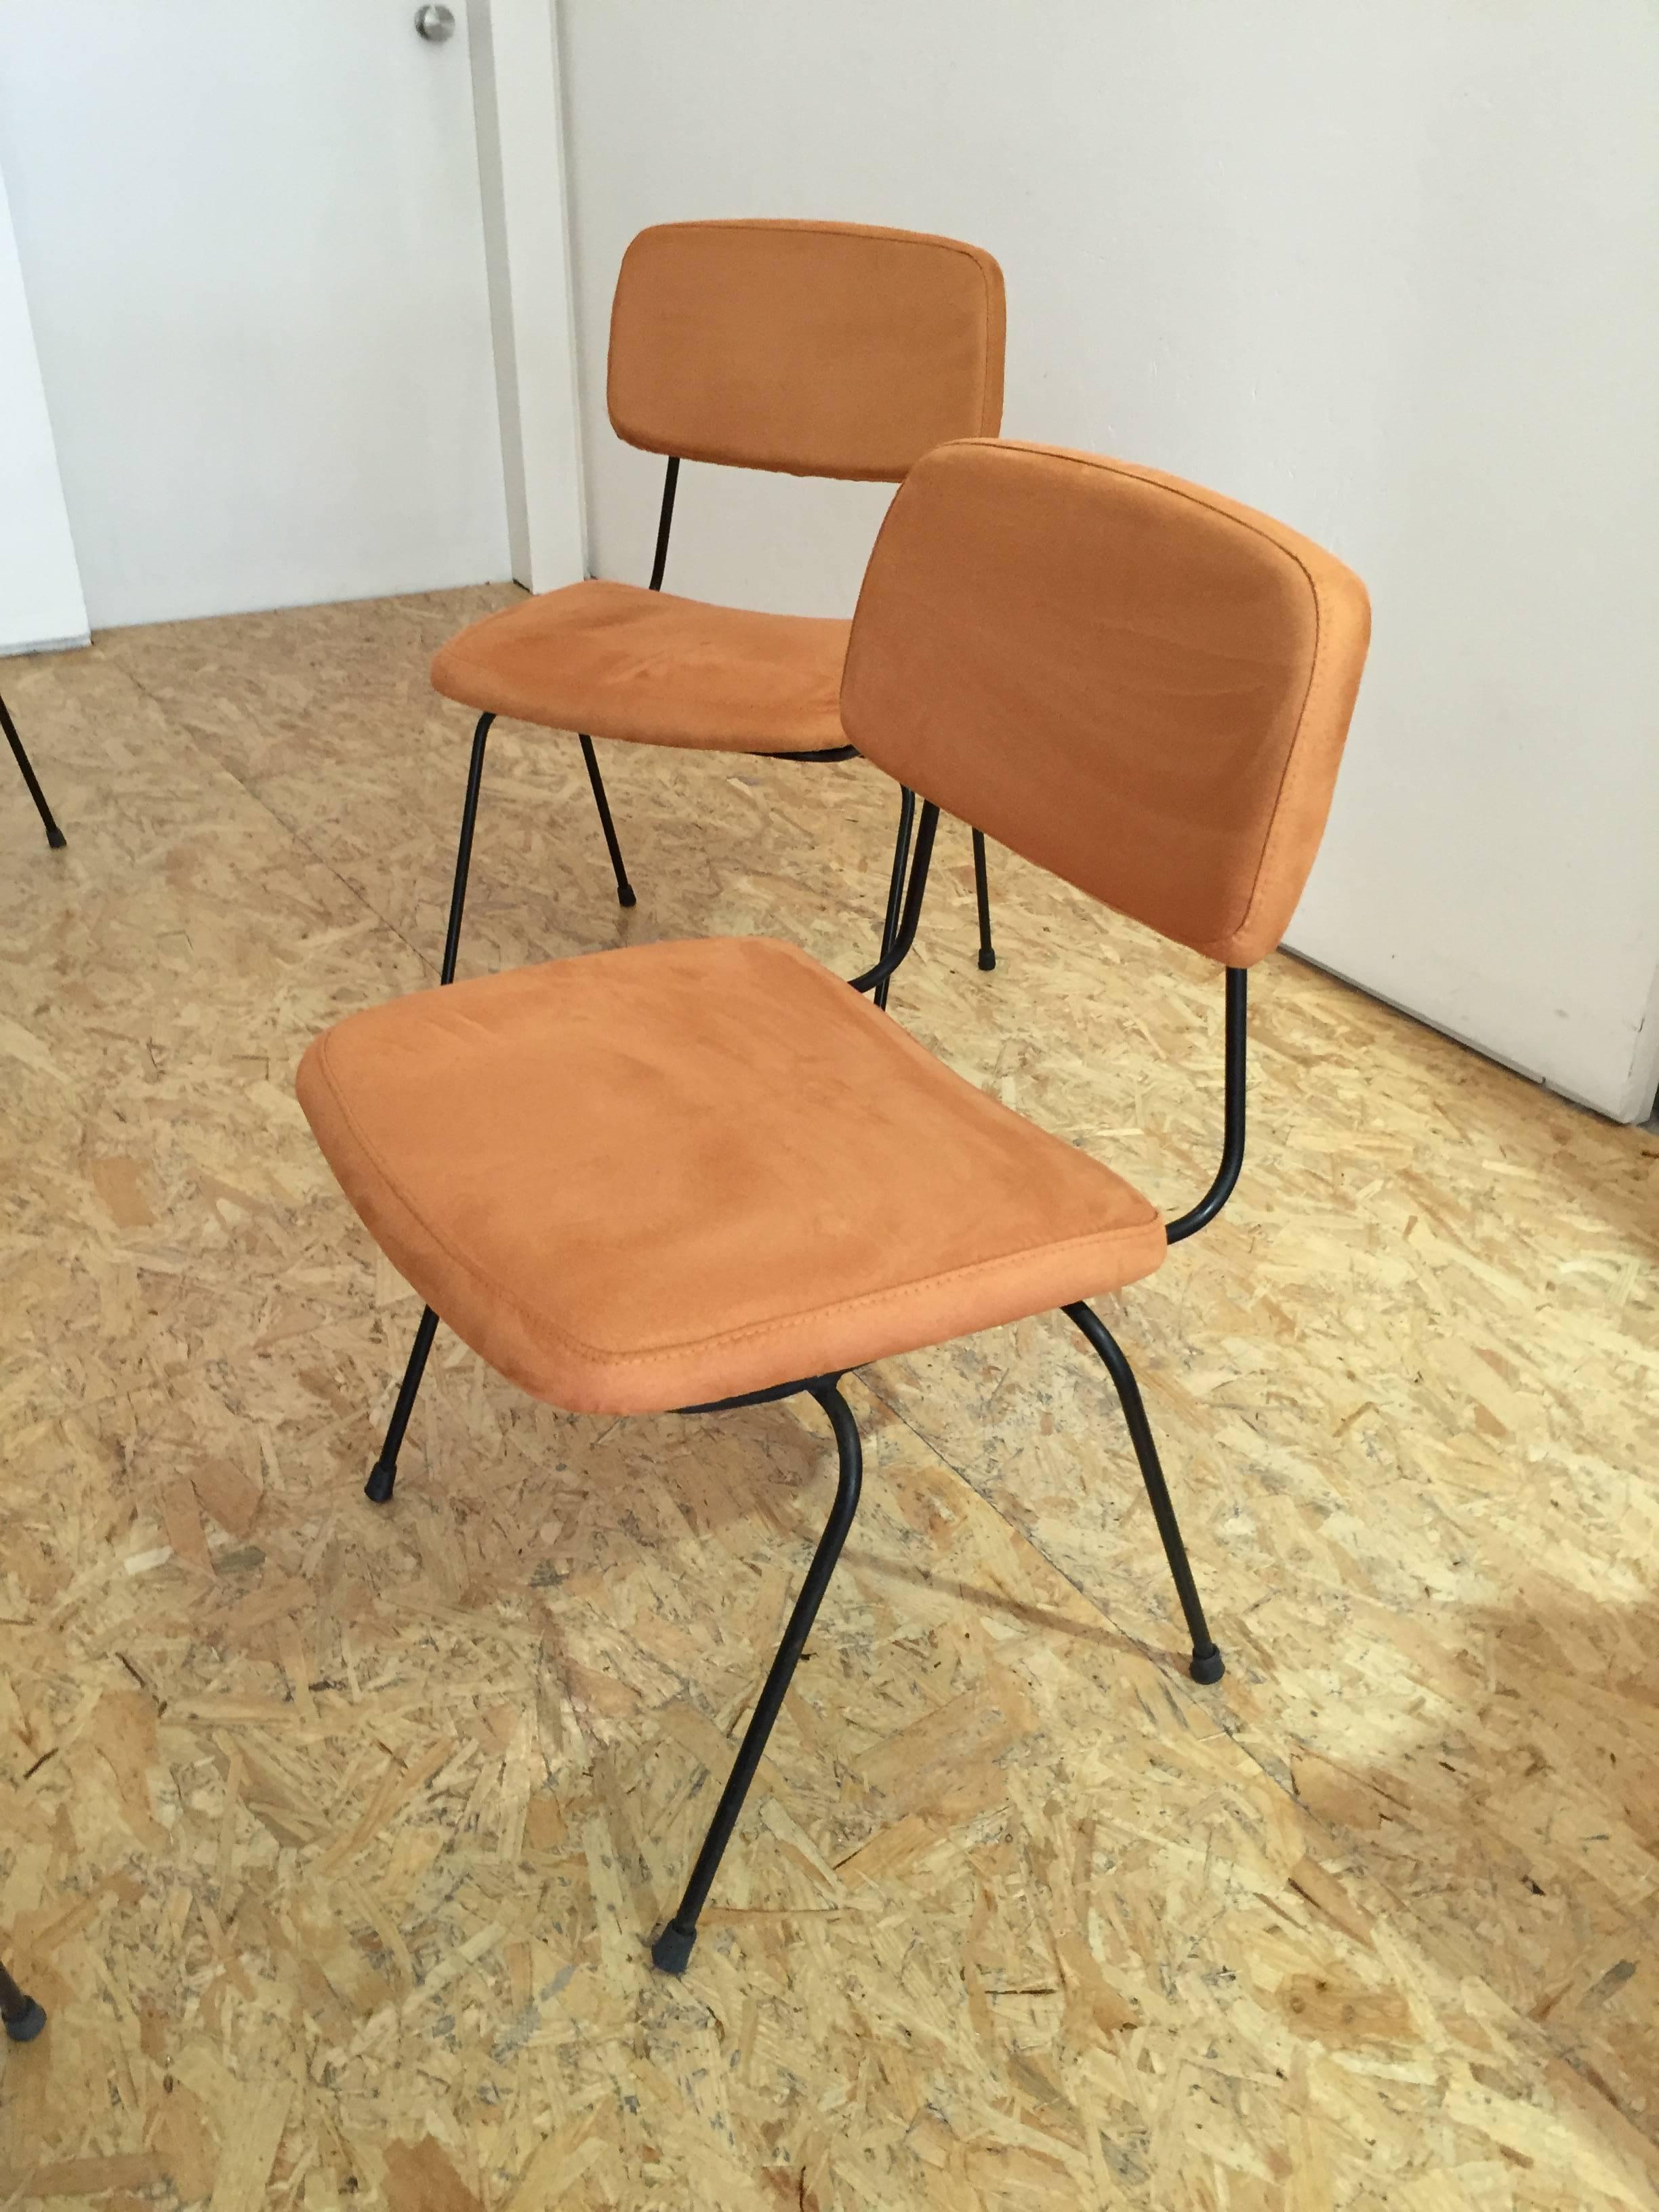 Portuguese Set of Six Chairs and One Stool by Daciano da Costa